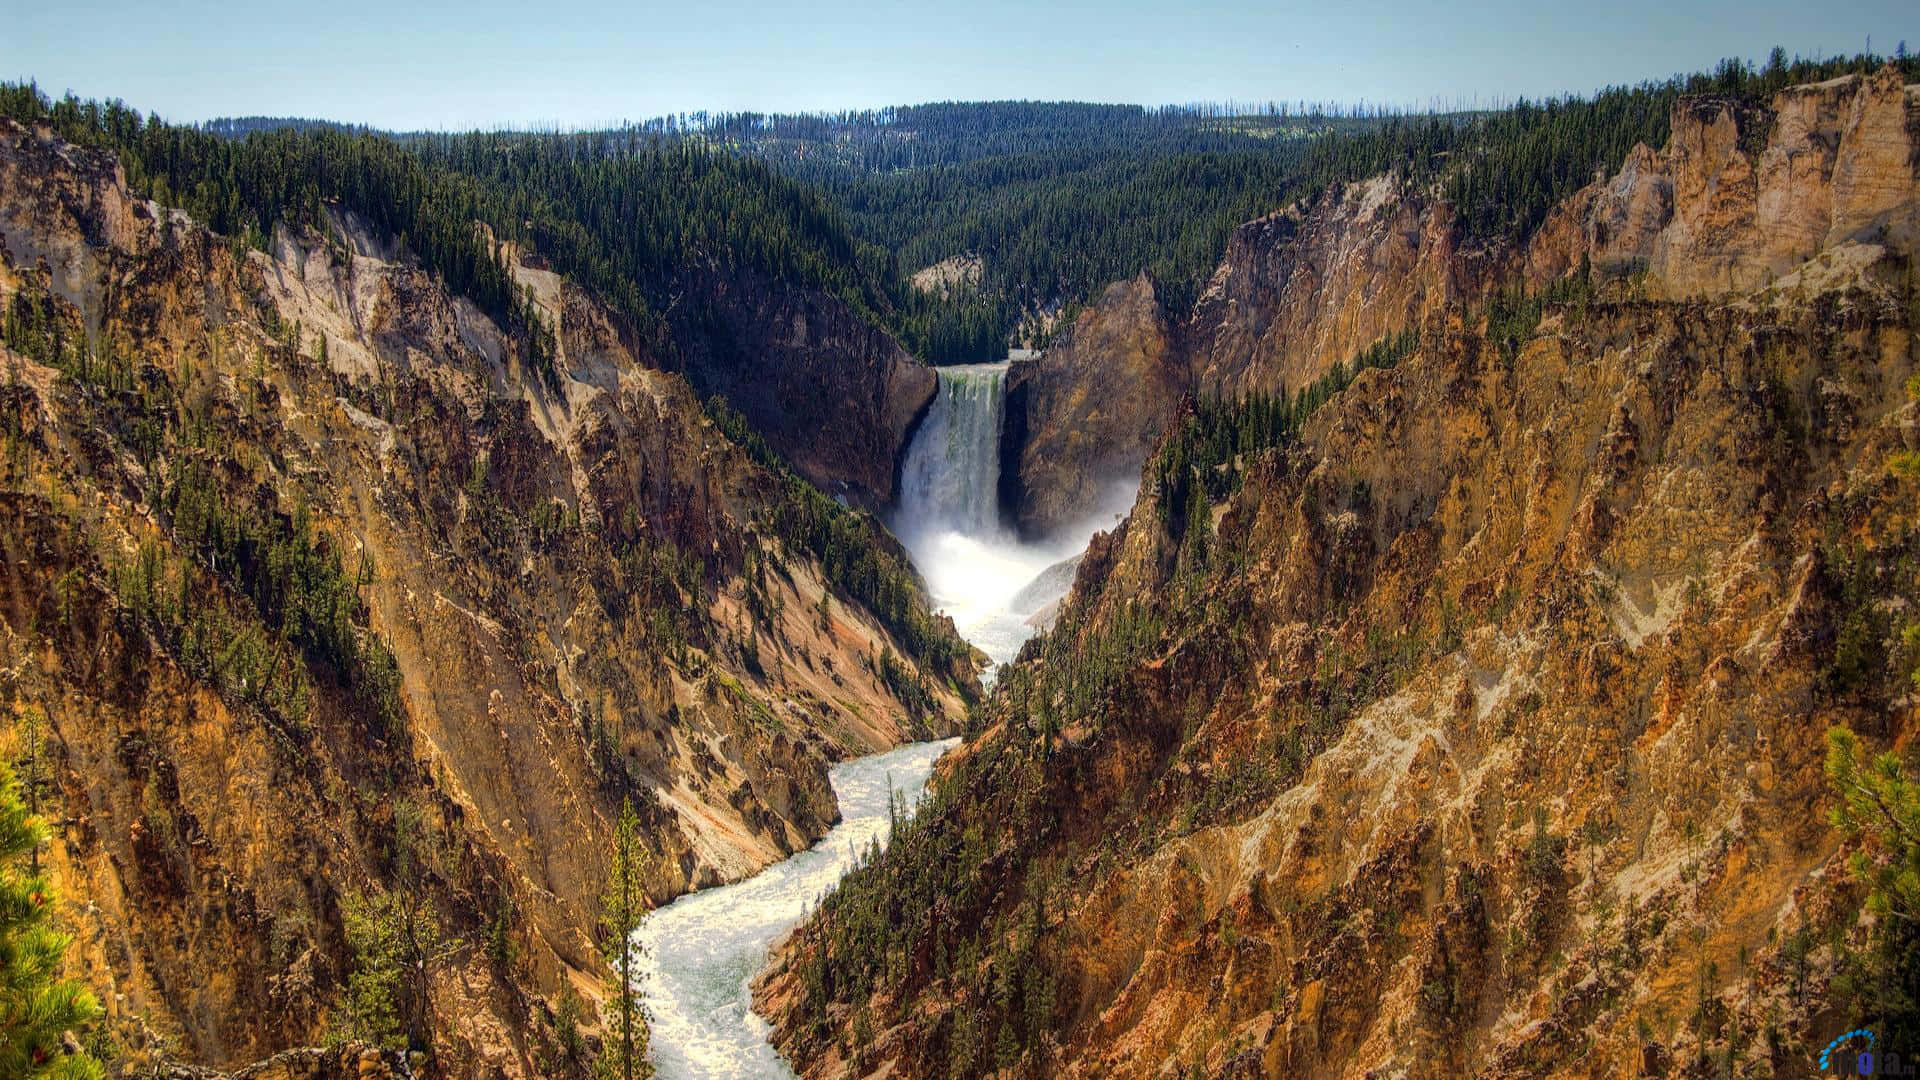 "Experience the Majestic Beauty of Yellowstone Wallpaper